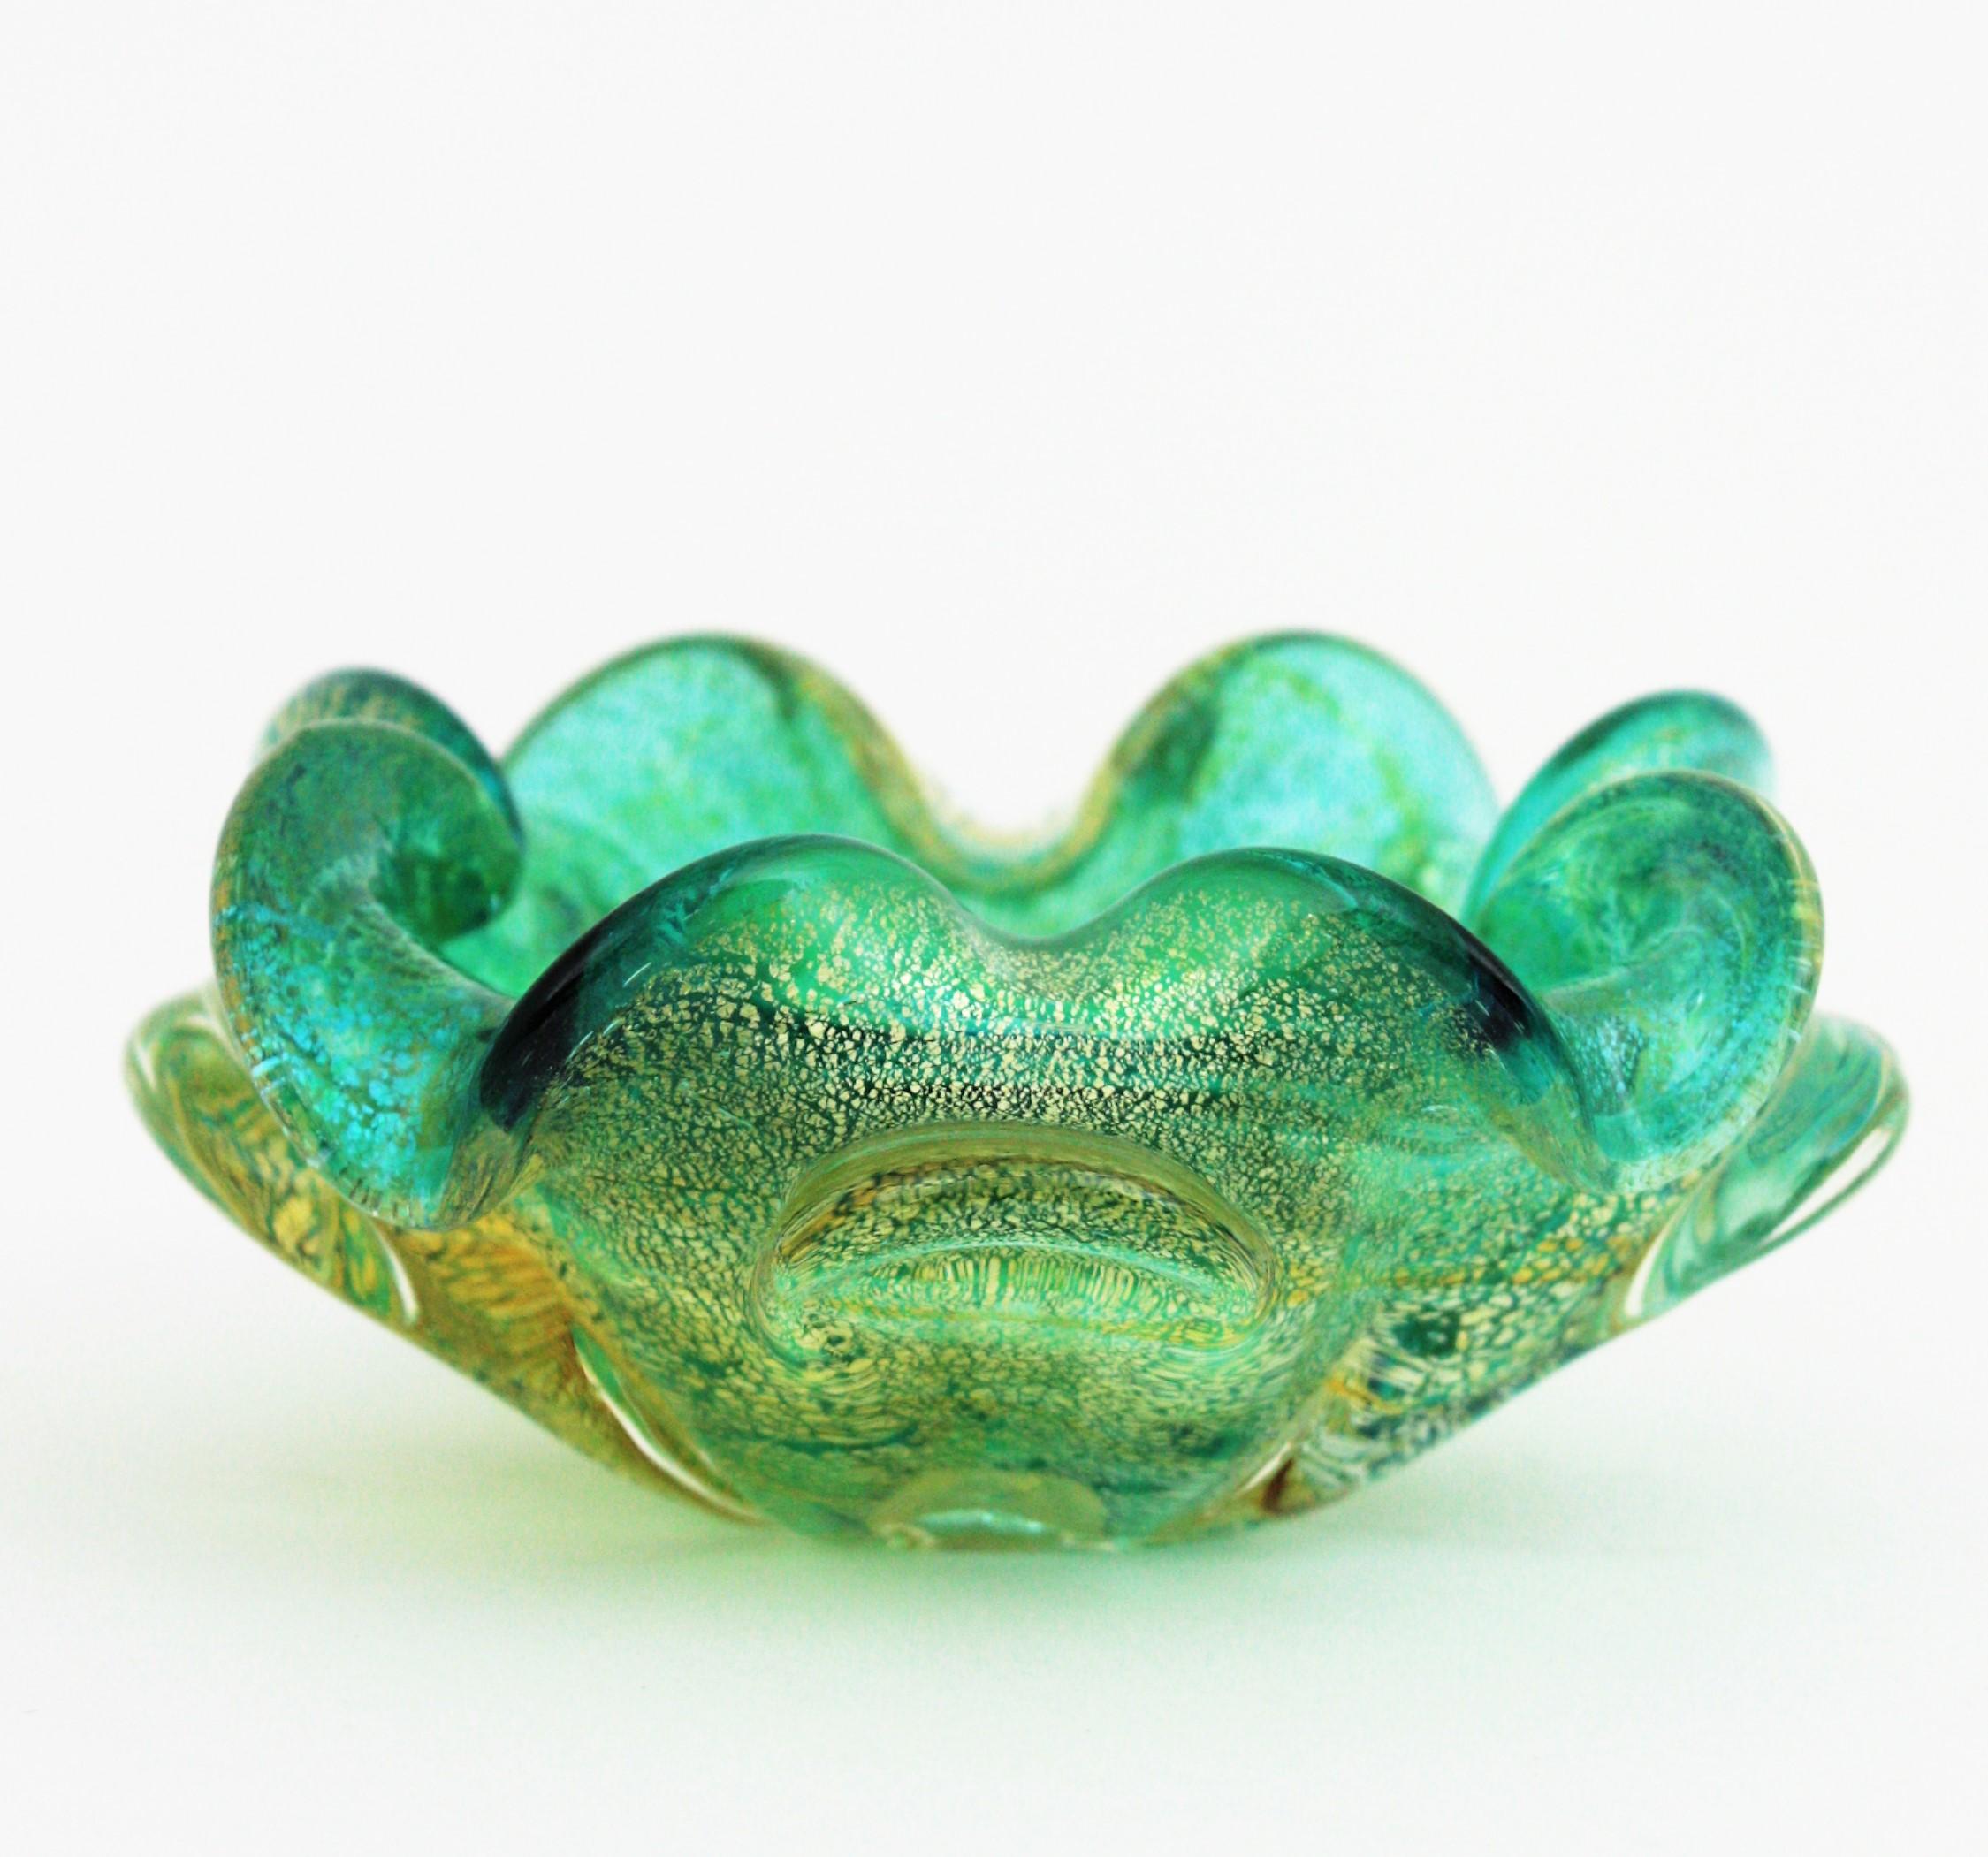 Lovely Murano blown glass bowl, Aqua Gree, Gold Leaf. Attributed to Seguso factory. Italy, 1950s
Green glass submerged into clear glass and covered by gold leaf inclussions at the exterior part.
Stunning color and unusual small size.
Perfect to